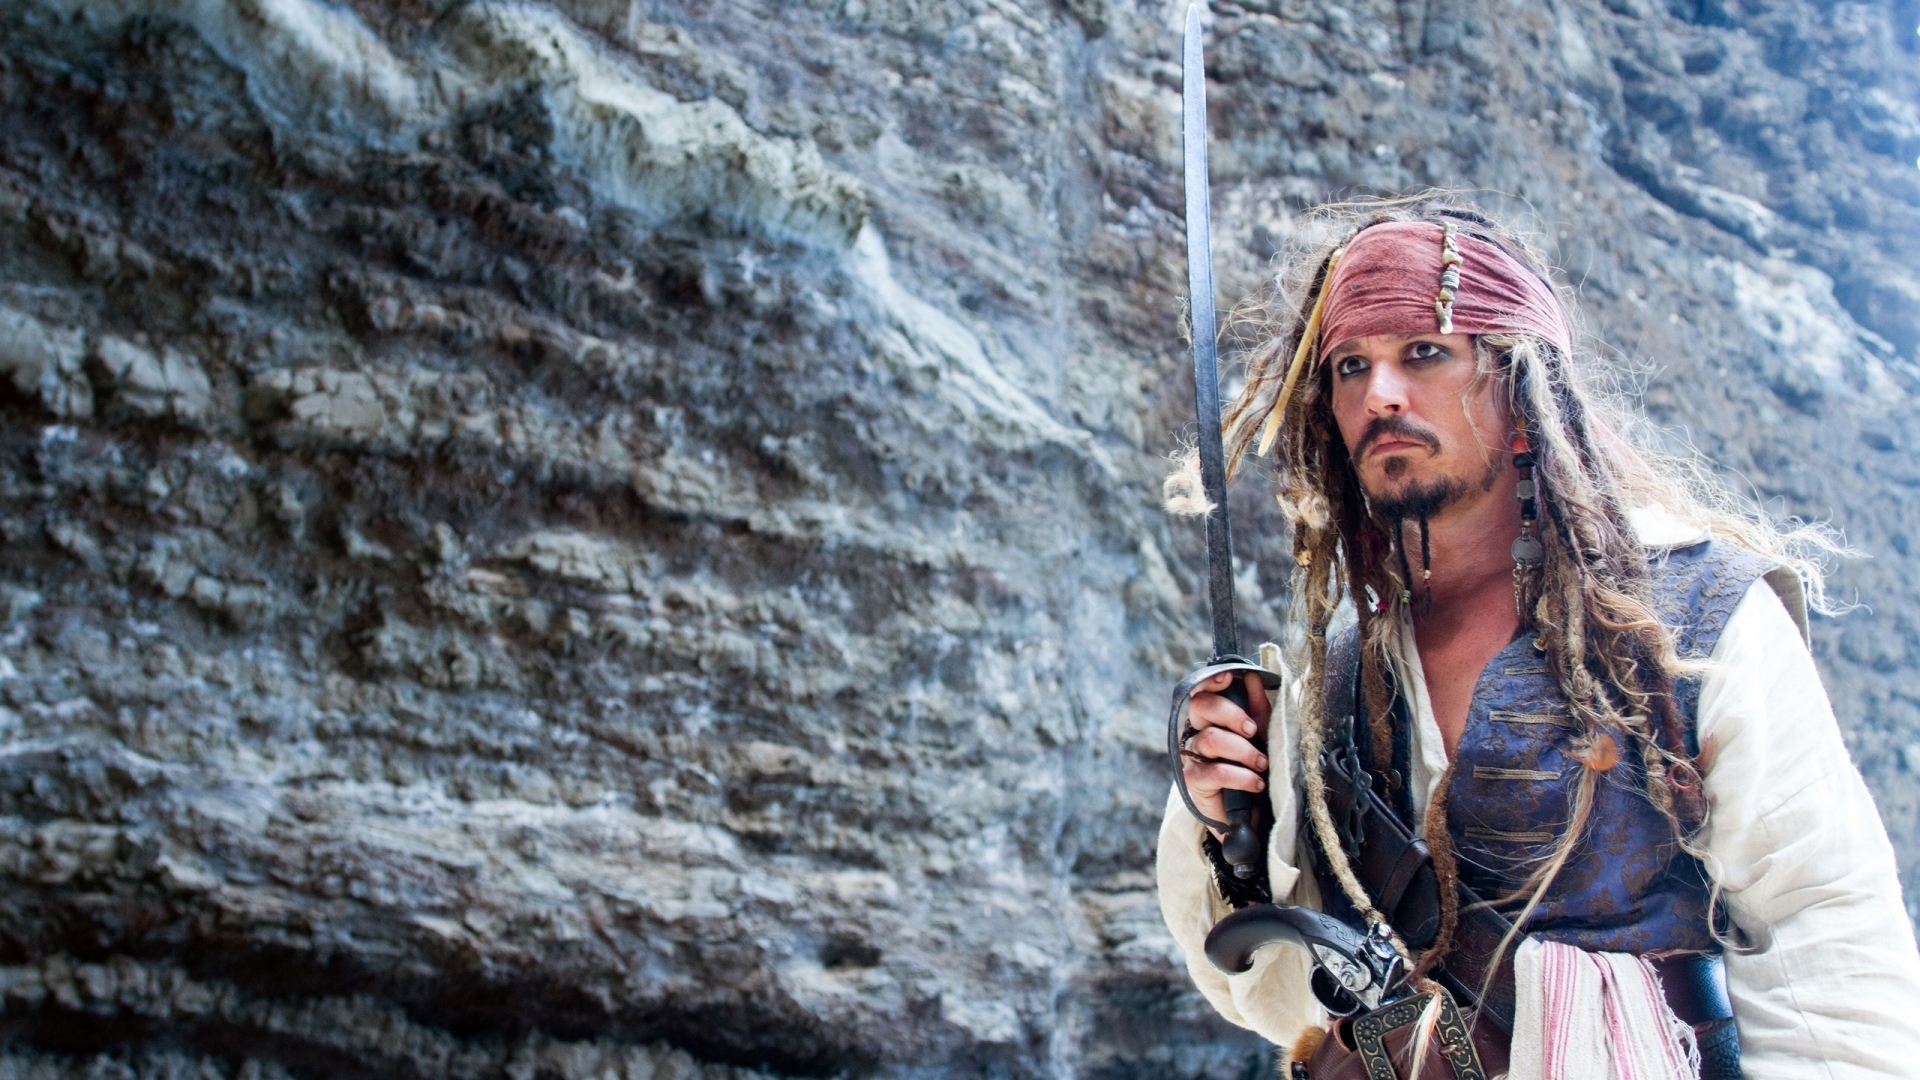 Jack Sparrow Pose for 1920 x 1080 HDTV 1080p resolution